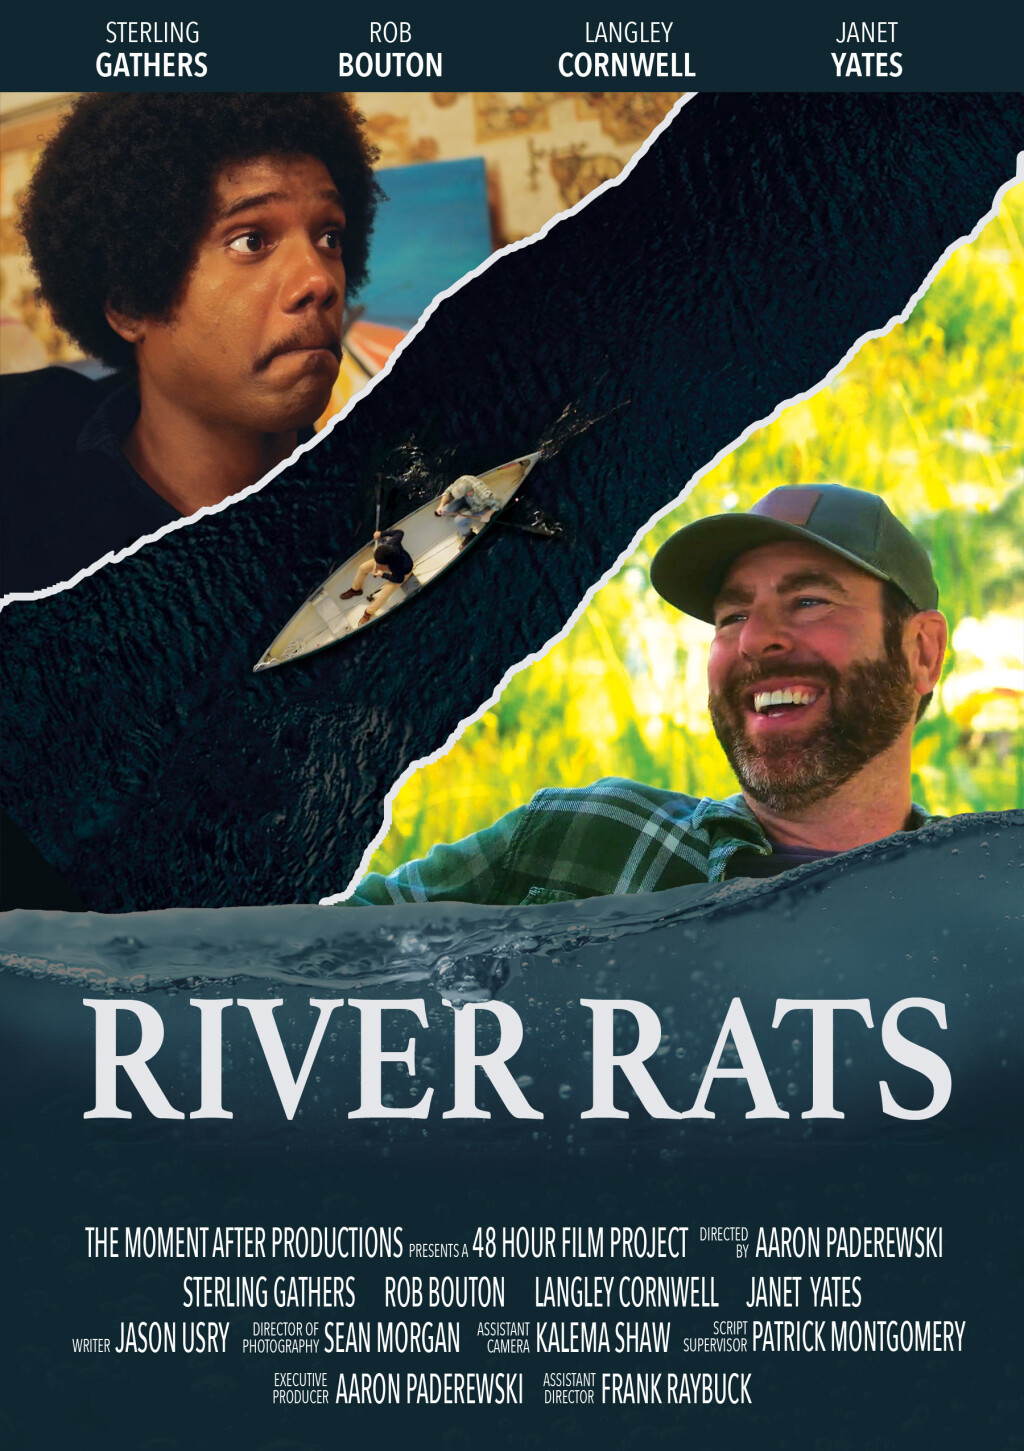 Filmposter for River Rats